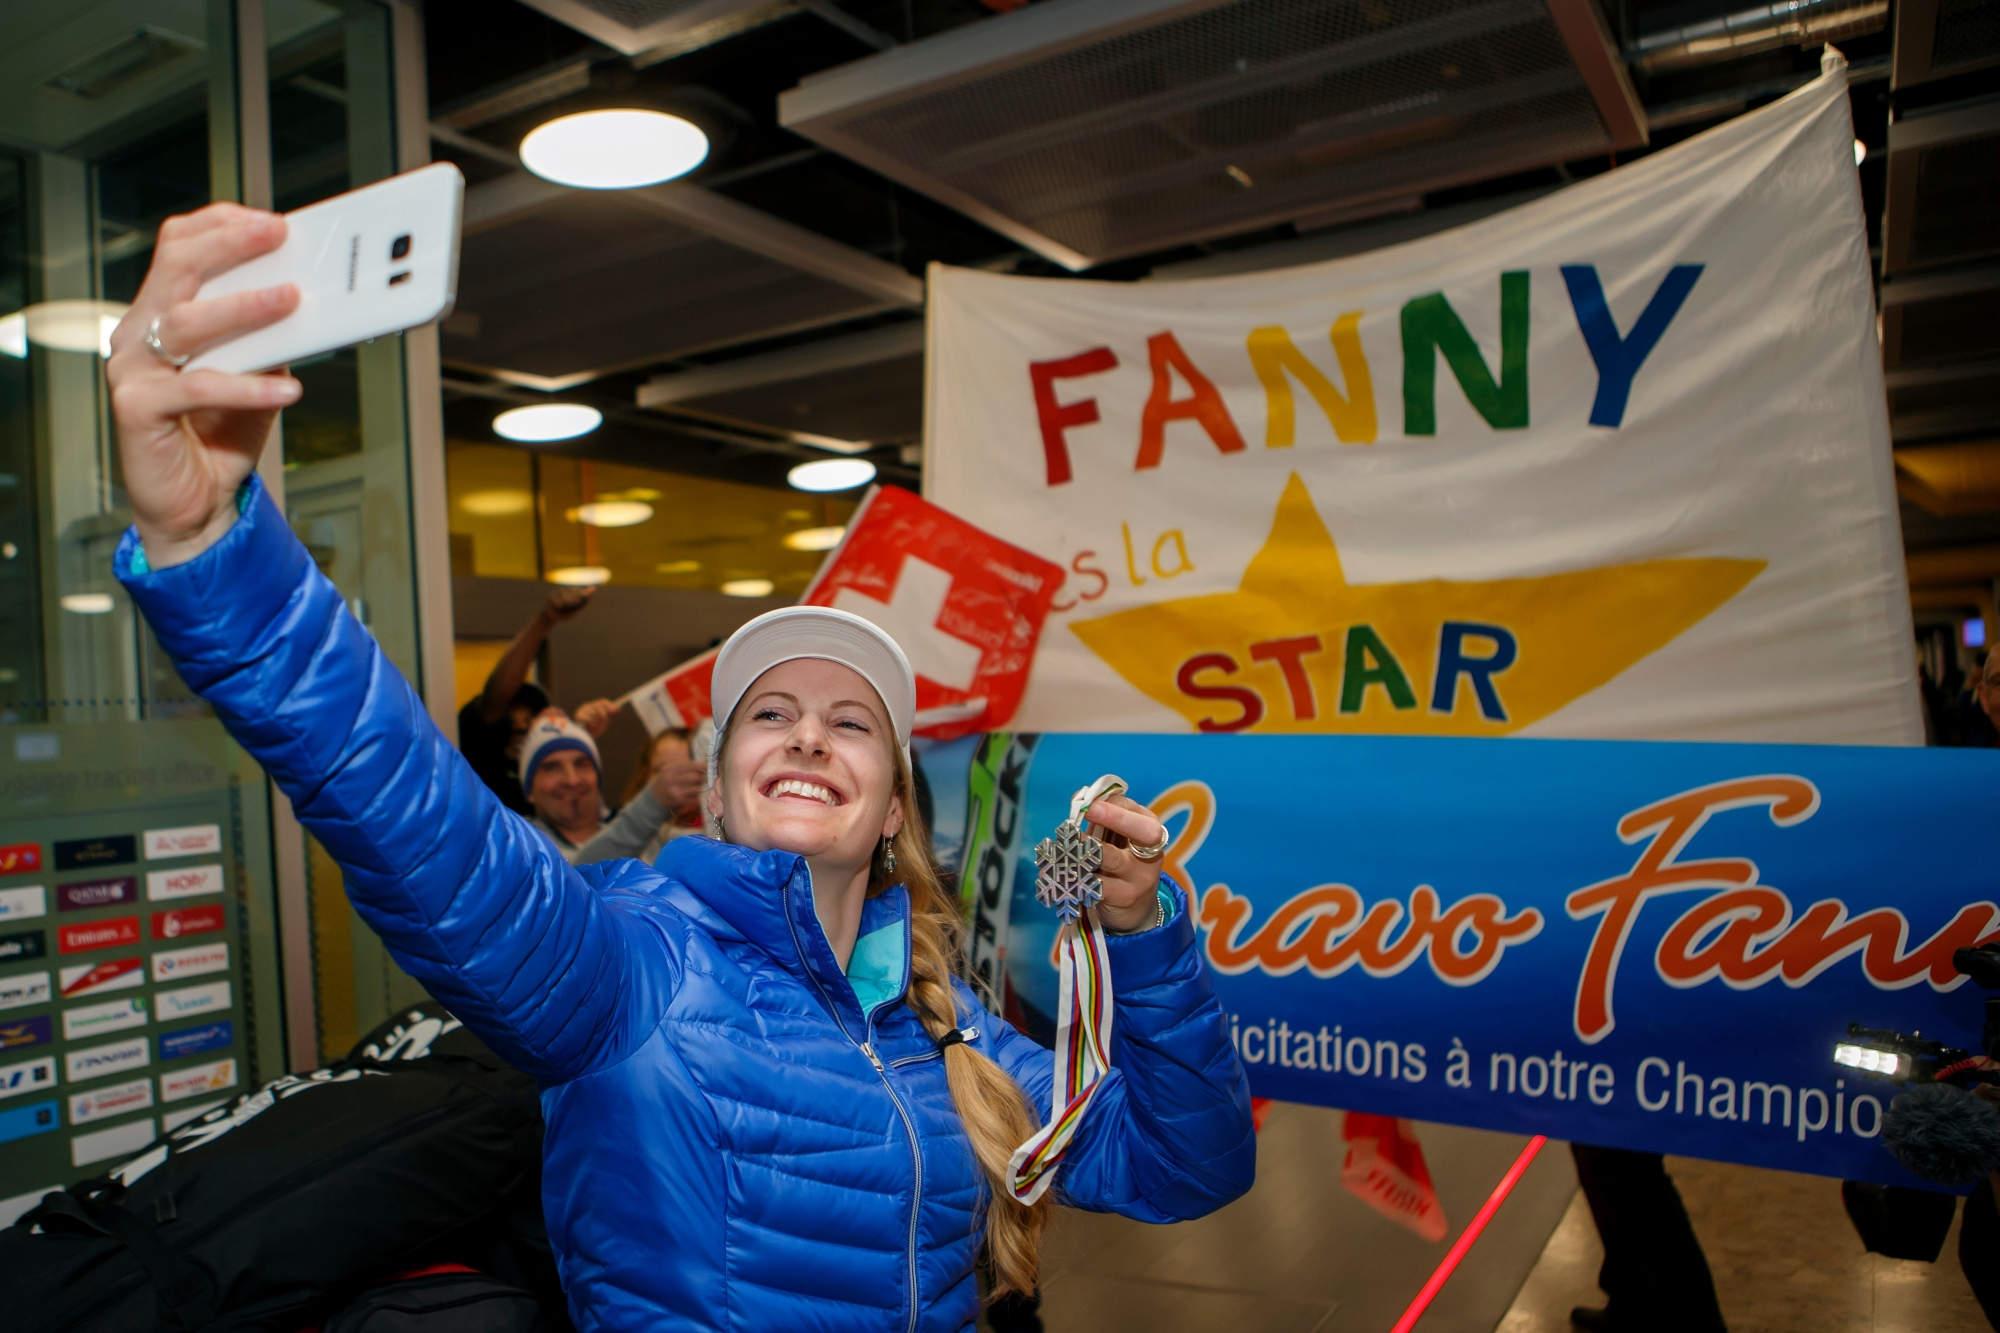 Switzerland's Fanny Smith, ski cross silver medalist at the World Championships, makes a selfie with her supporters, at the Geneva airport, in Geneva, Switzerland, Sunday, March 19, 2017. Switzerland's skier Fanny Smith won the silver medal of the Women's Ski Cross final at the FIS Freestyle Ski and Snowboard World Championships 2017 in Sierra Nevada, Spain. (KEYSTONE/Salvatore Di Nolfi) SWITZERLAND FIS WC FREESTYLE SKI CROSS